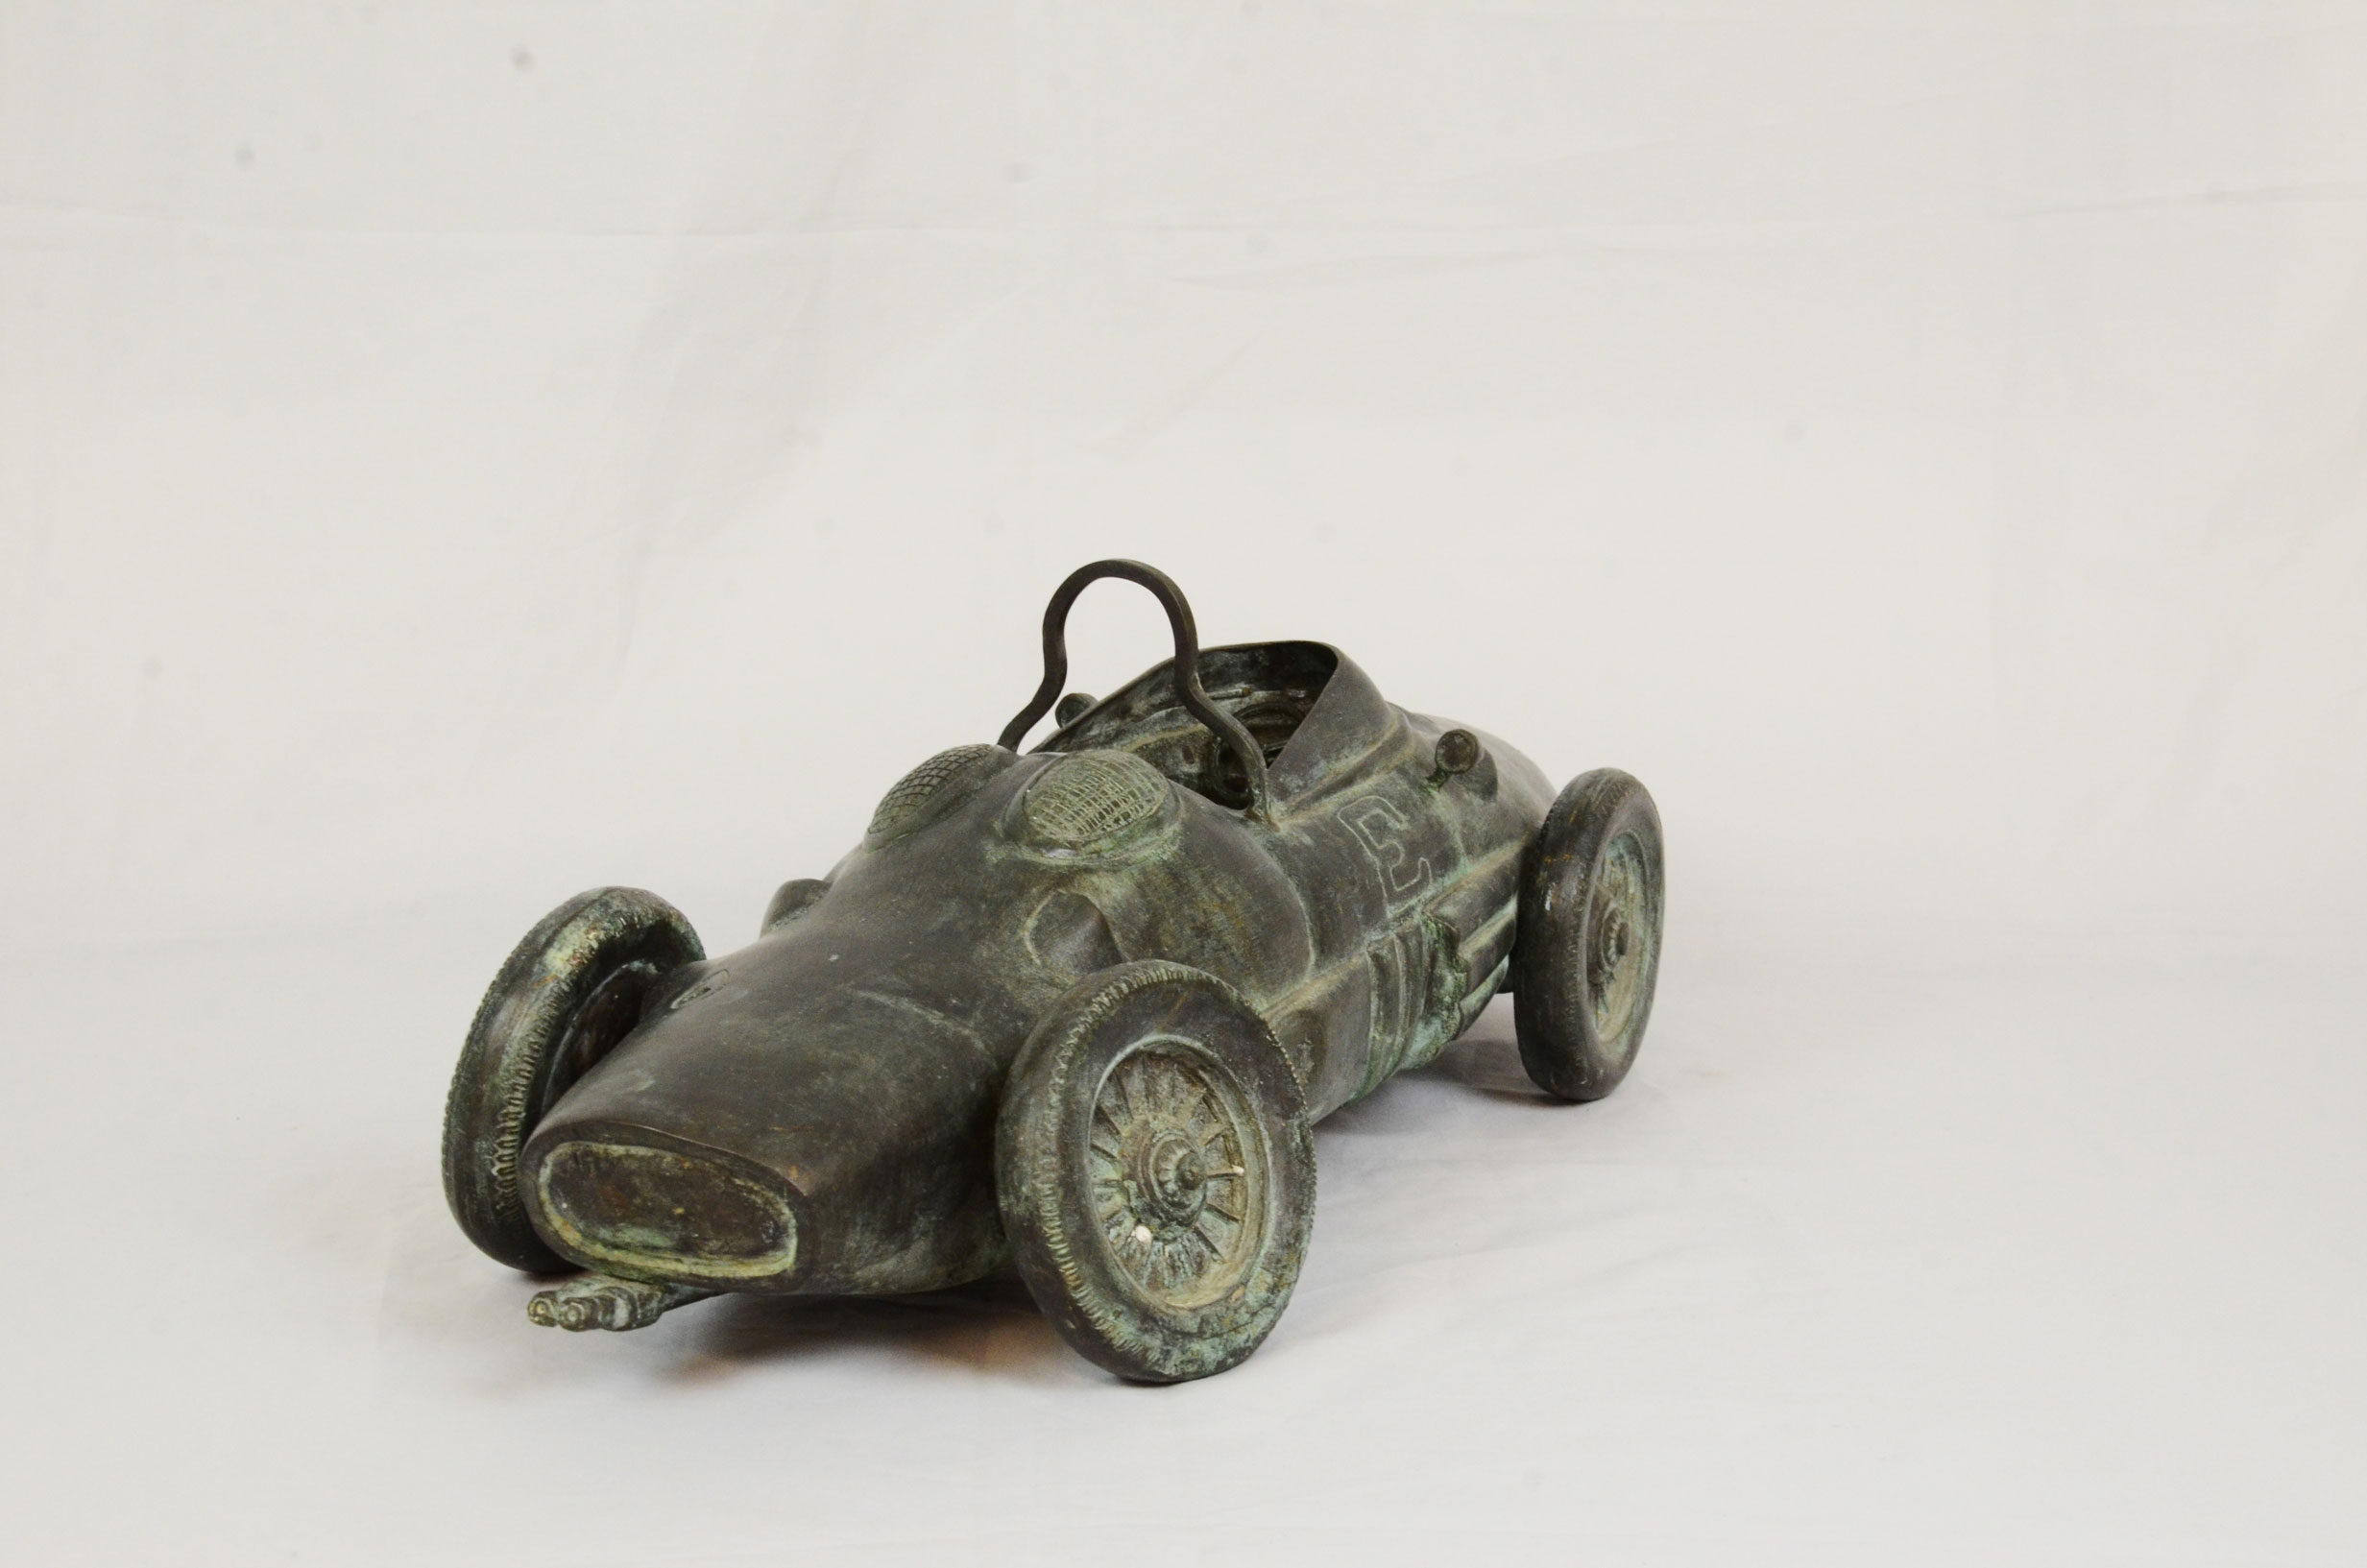 Vintage all brass racing car statue - Image 5 of 5